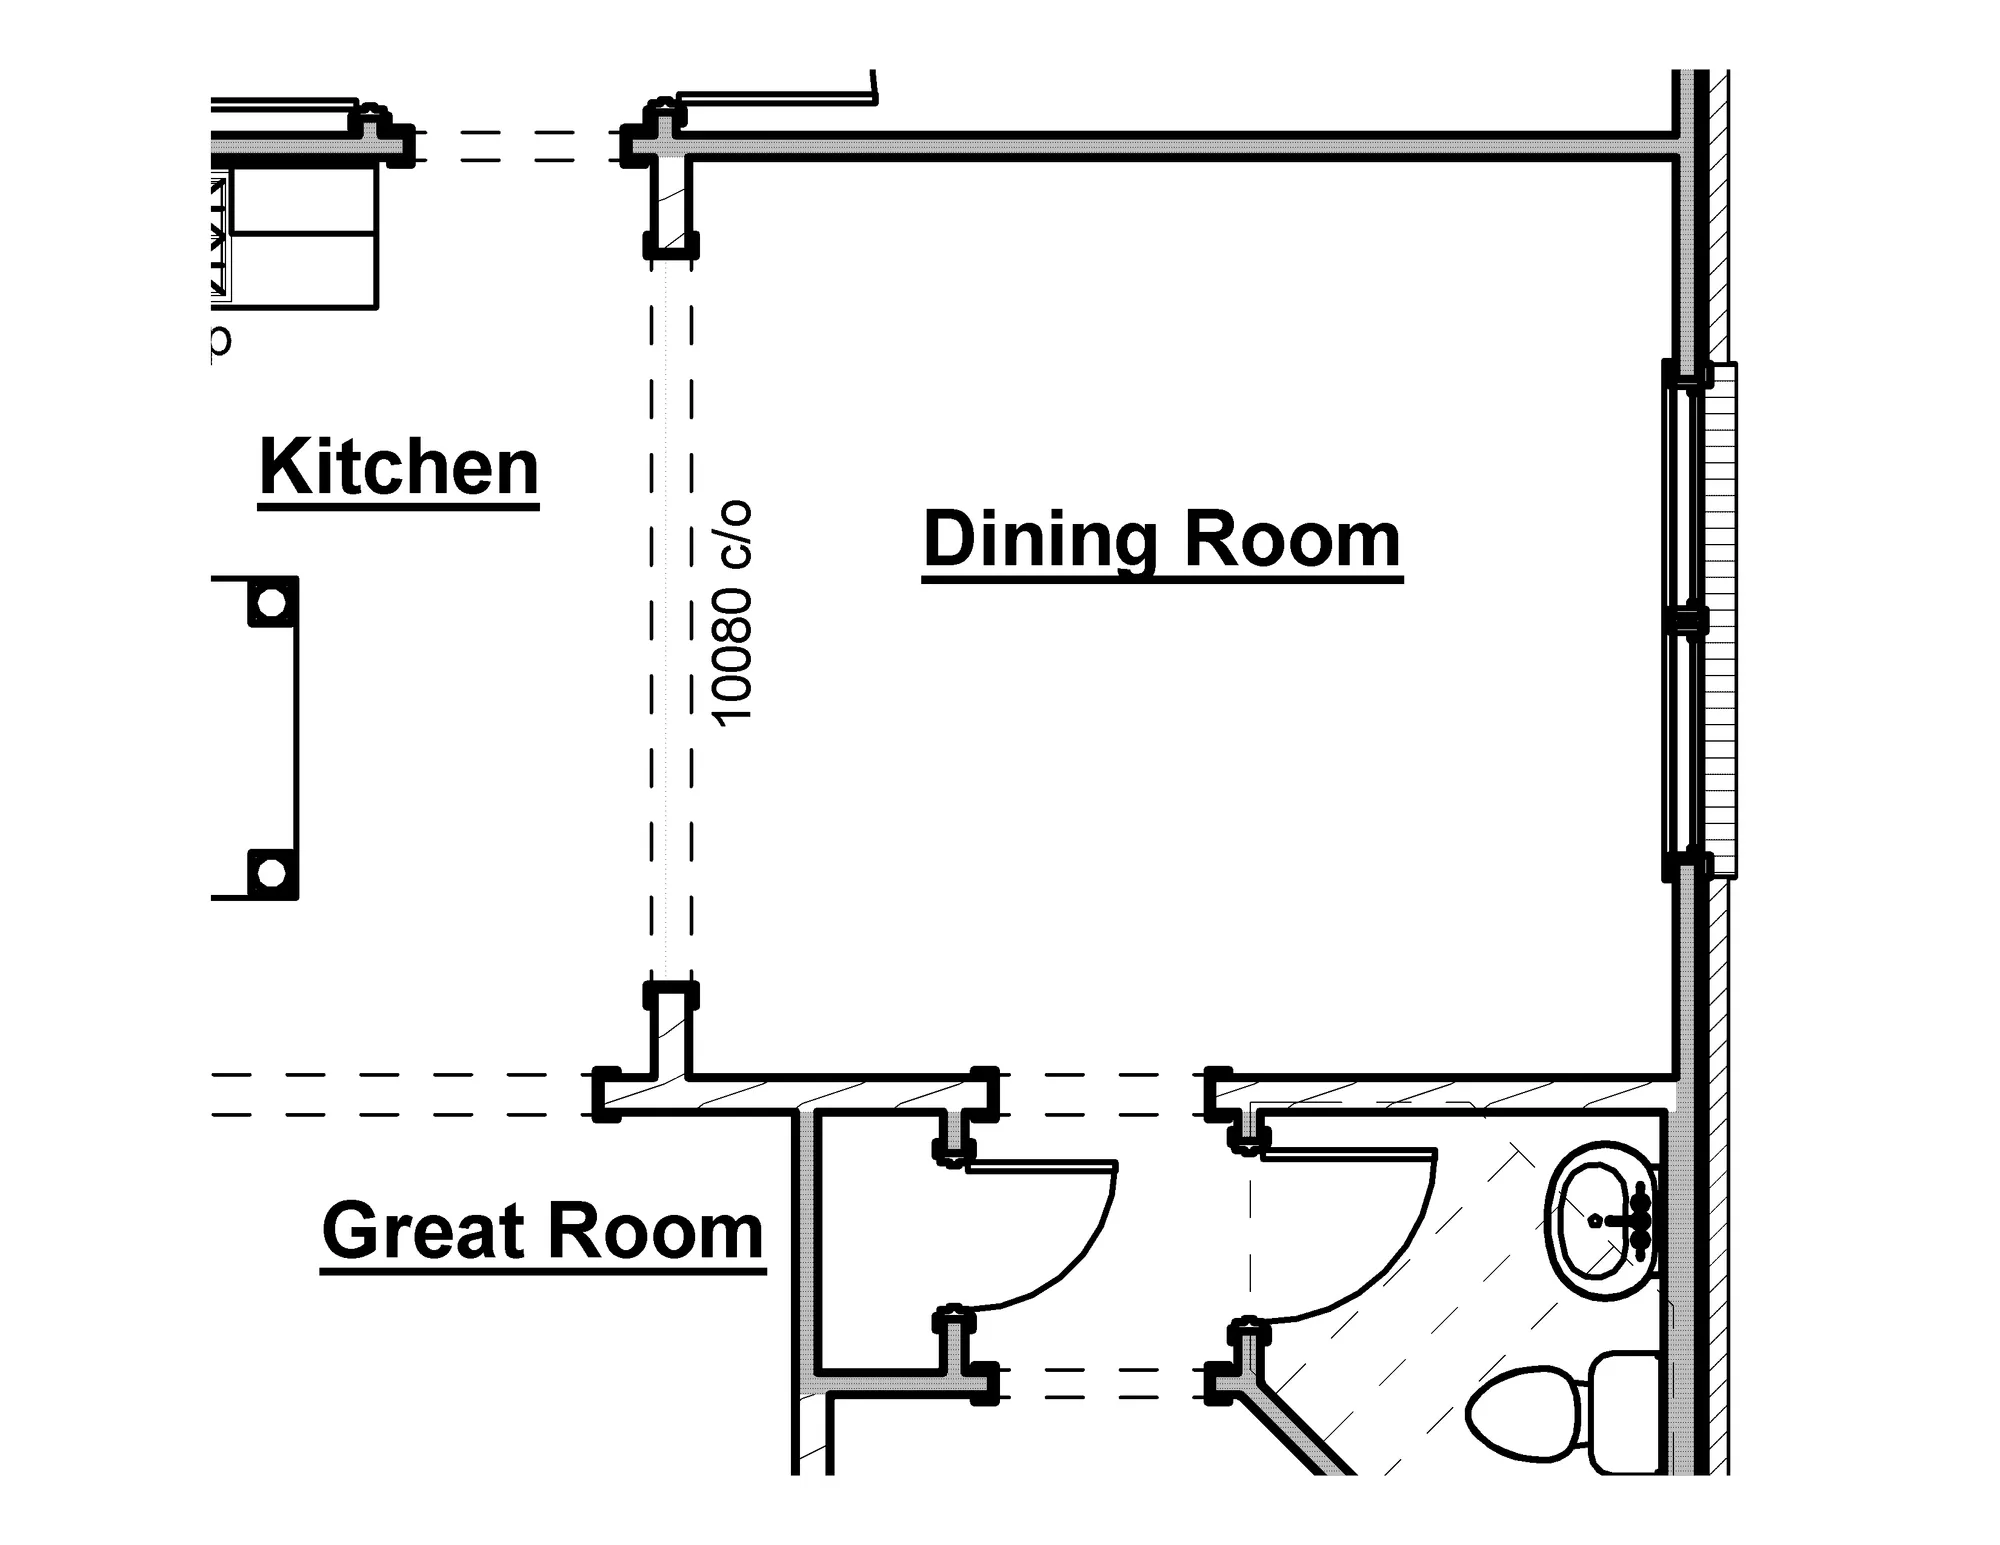 Dining Room Cased Opening Option - undefined